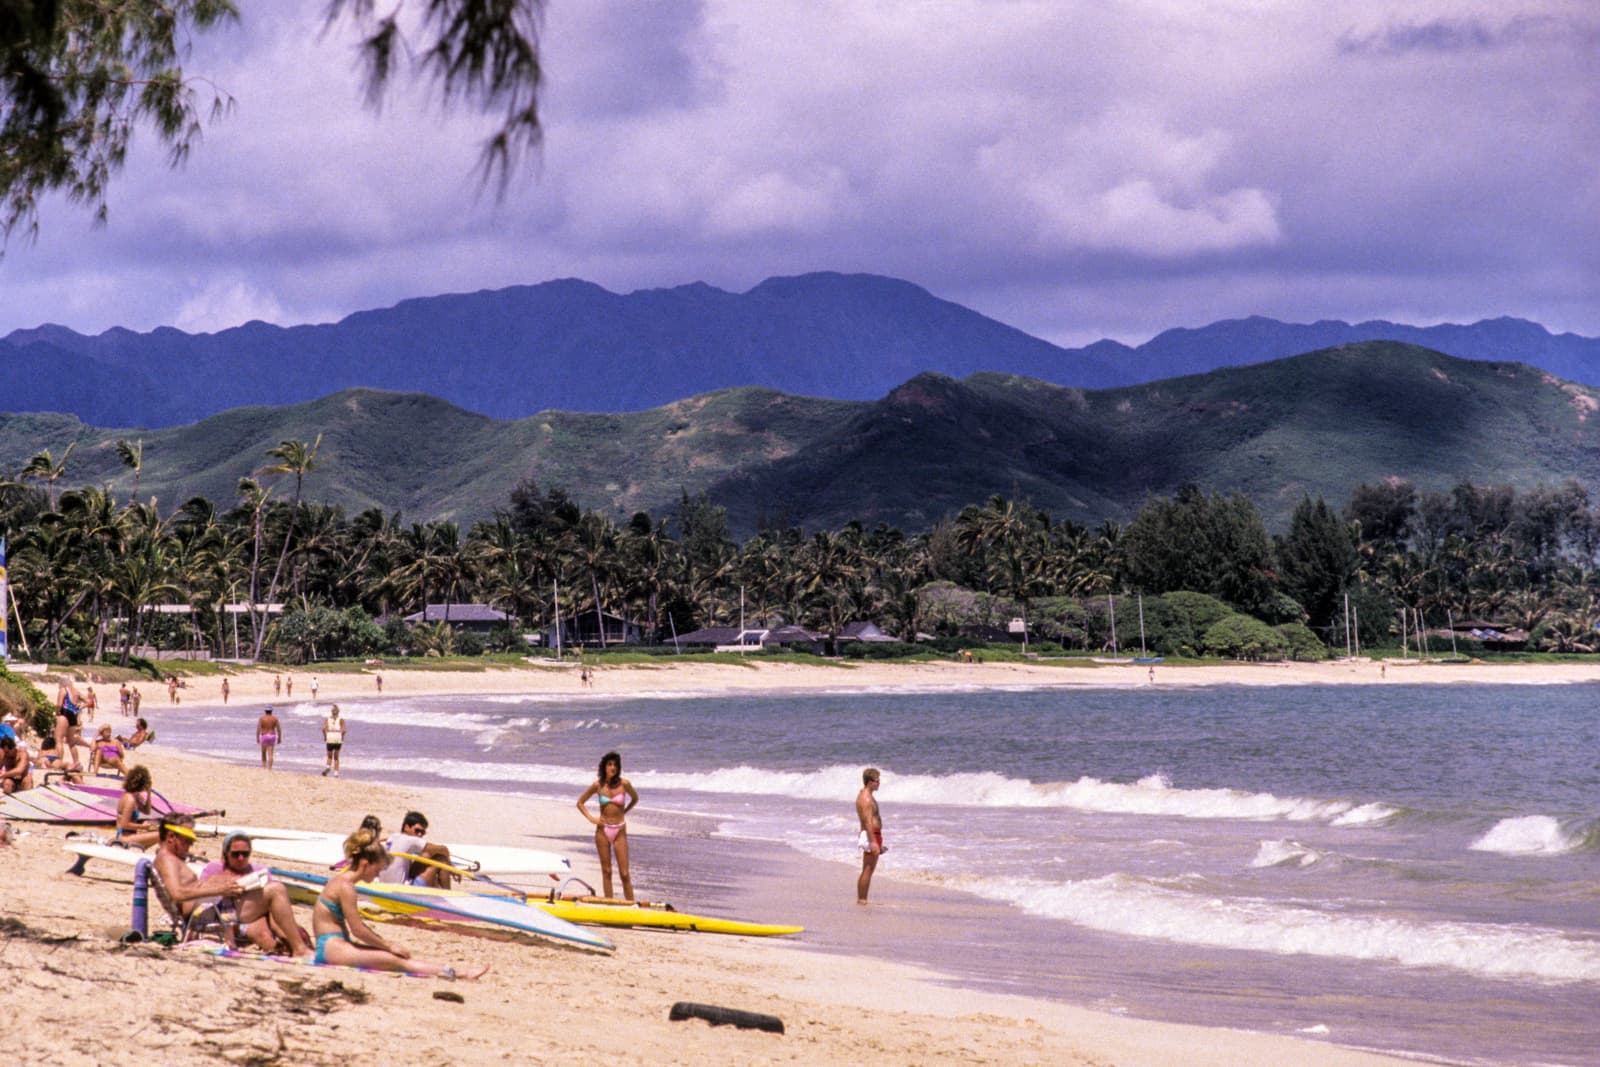 A picture of a public beach on Oahu, showing people along the beach and in the ocean